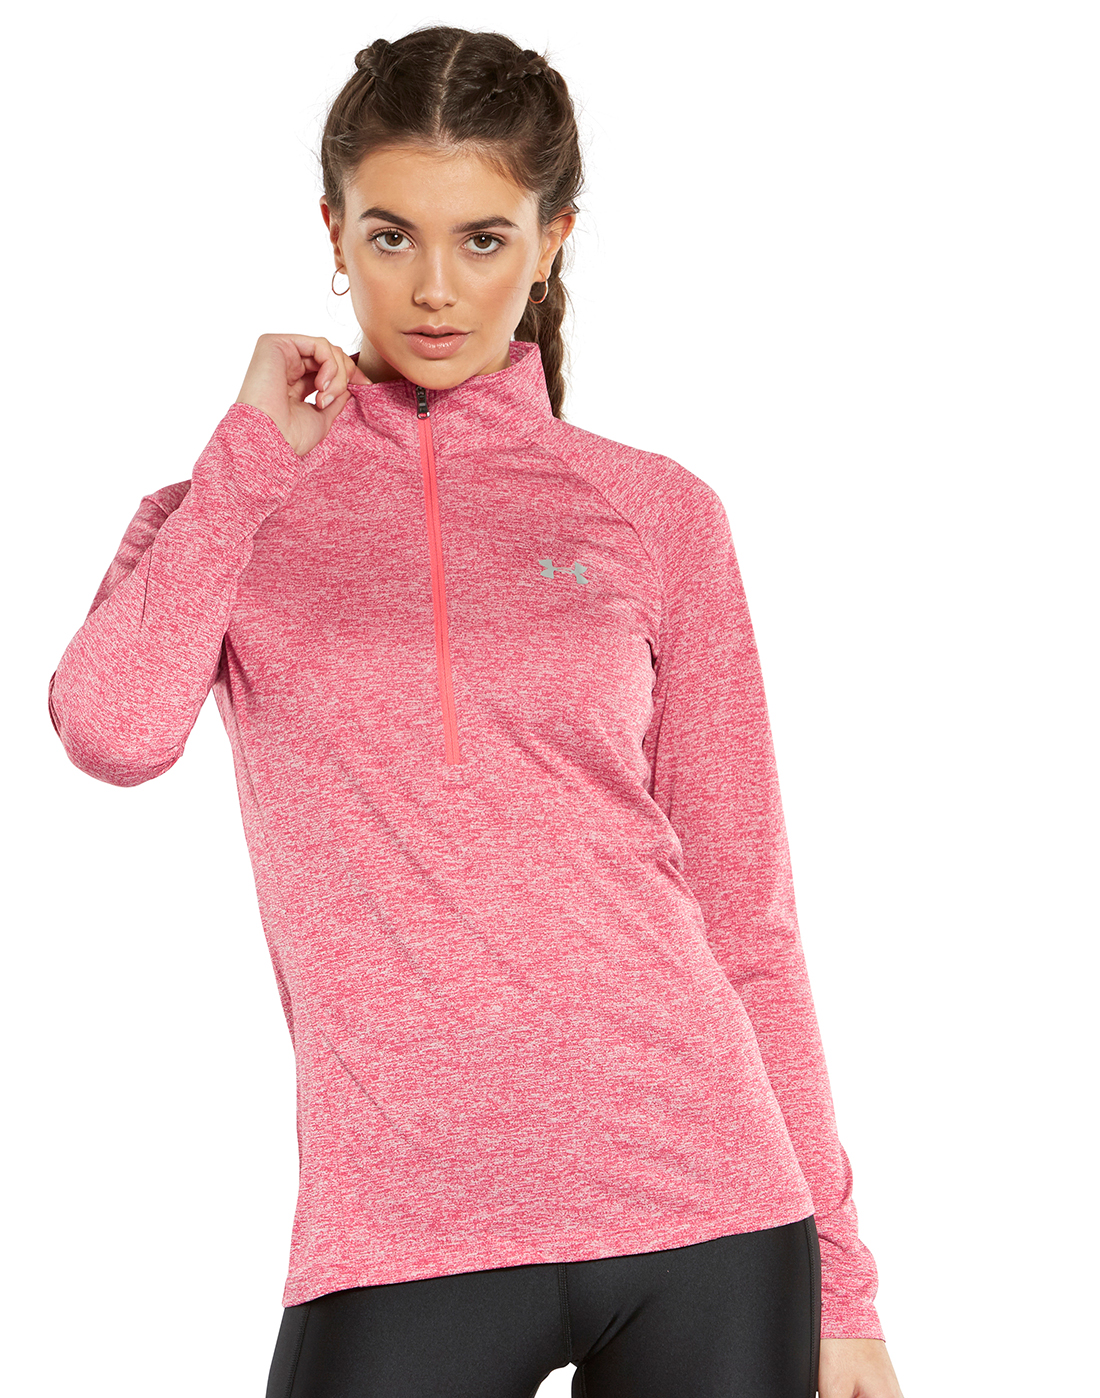 under armour gym top womens